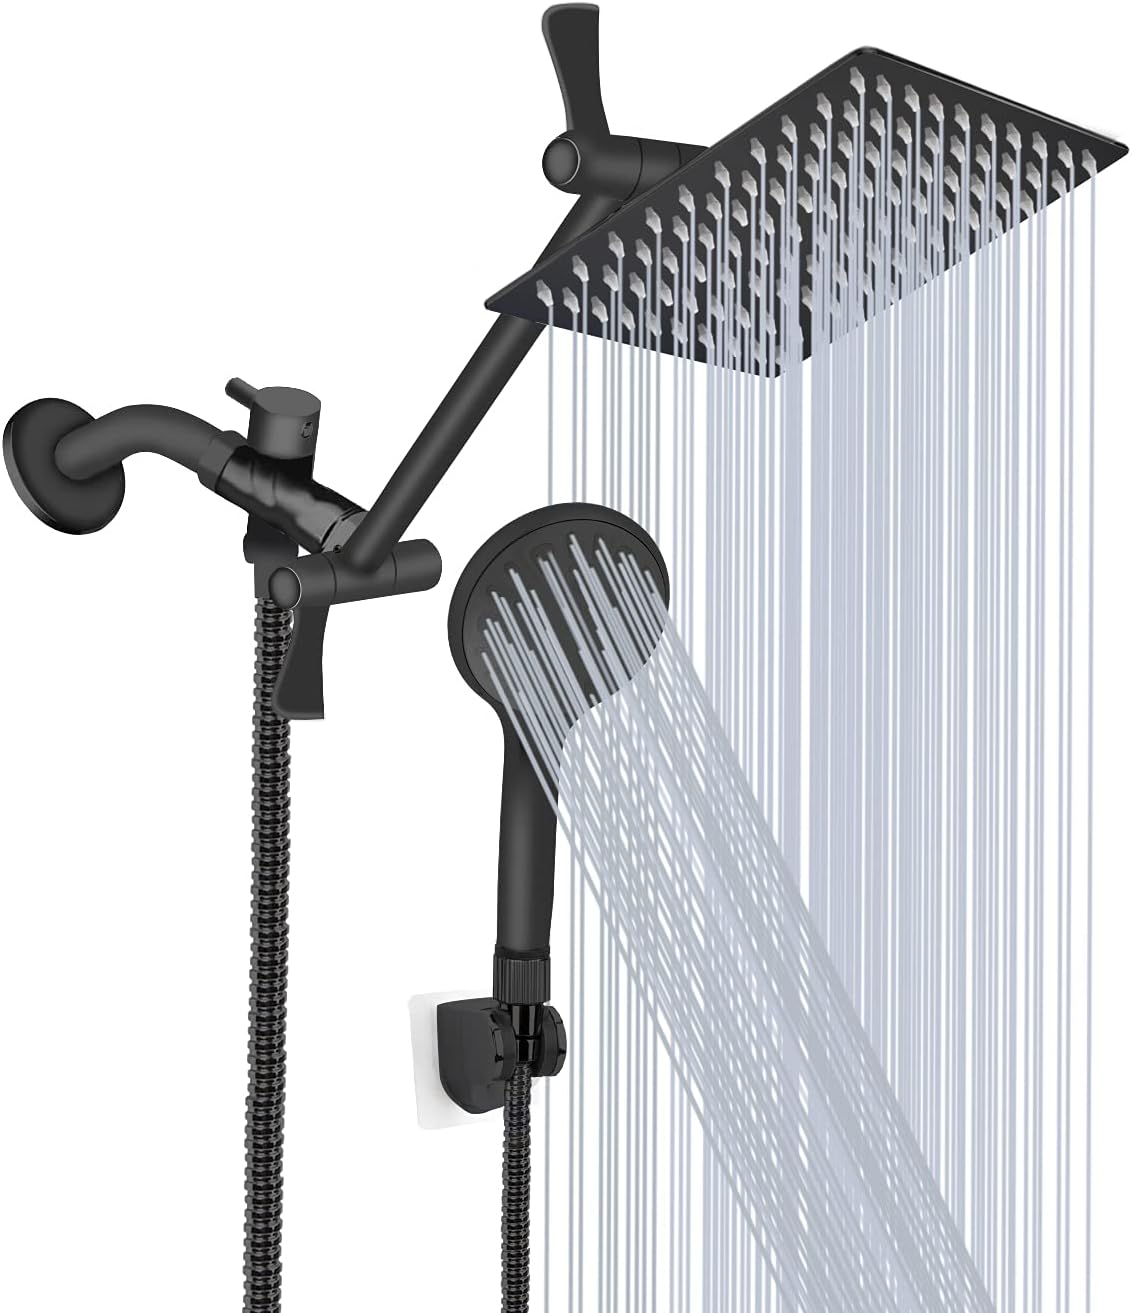 Shower Head, 8 High Pressure Rainfall/Handheld Shower Combo with 11'' Extension Arm, 9 Settings, Anti-leak Shower Head with Holder, Height/Angle Adjustable, Chrome, Matte Black